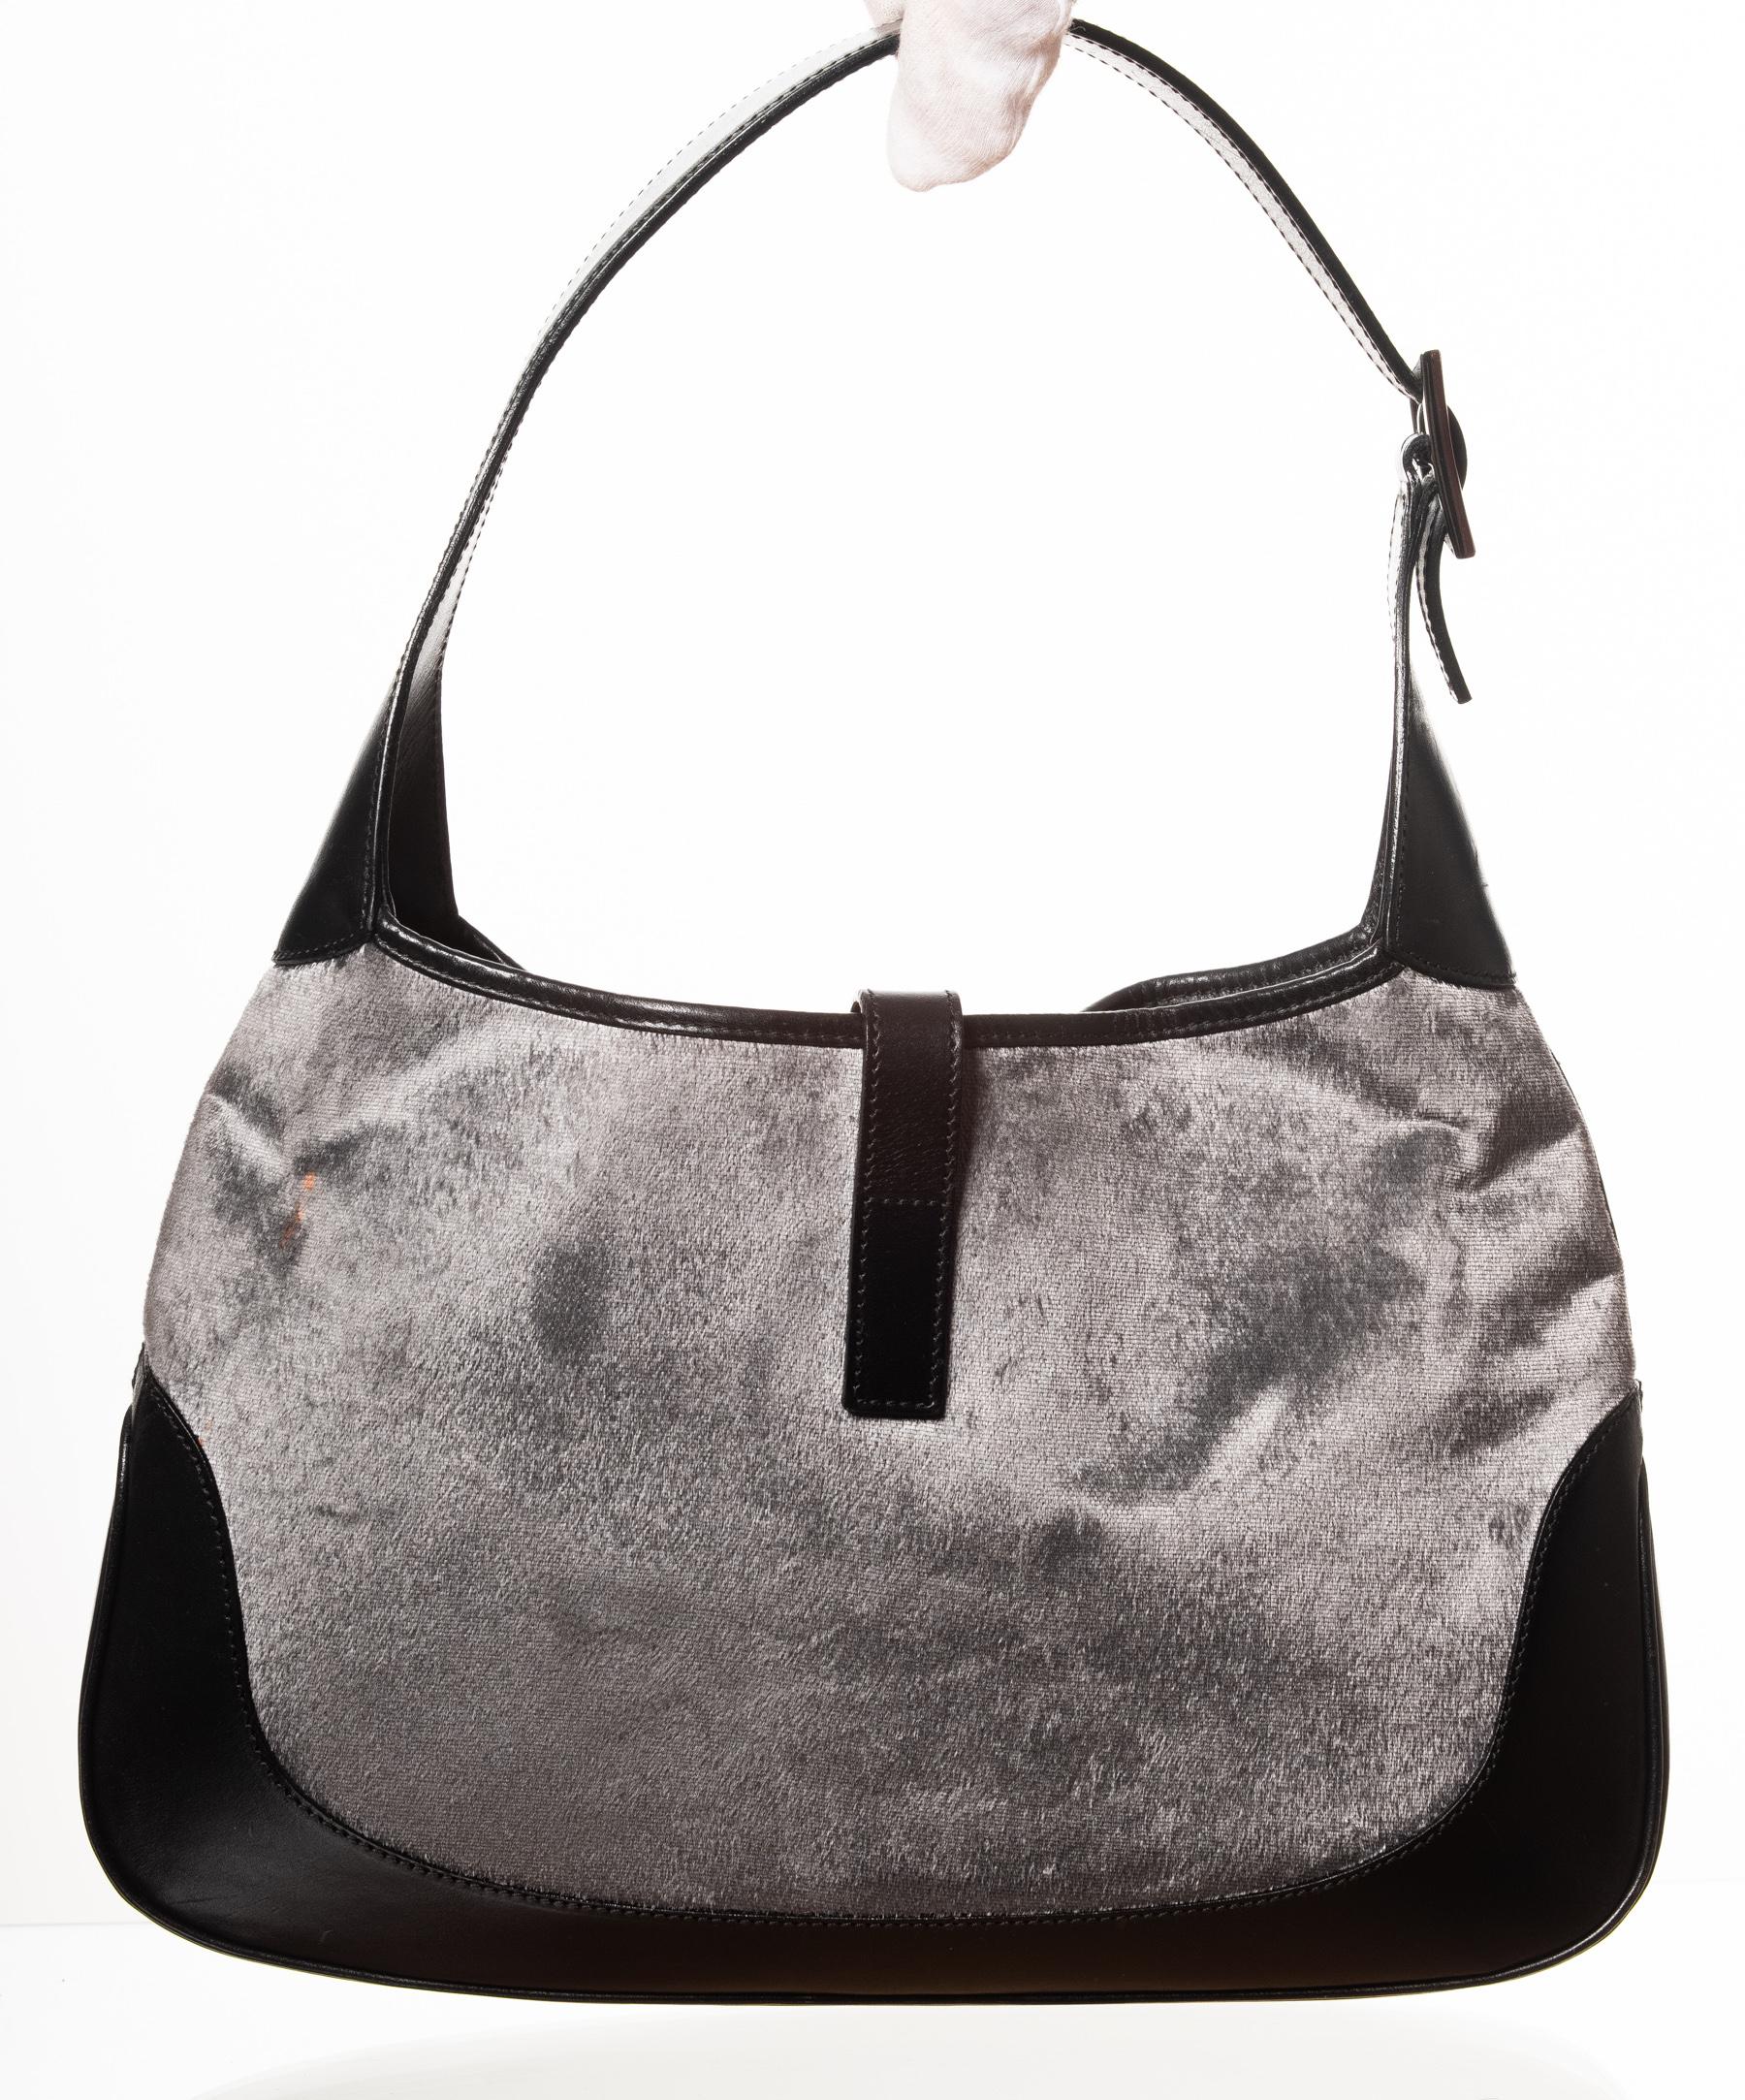 Gucci Jackie Hobo bag made of velvet and features leather finishes, push pin lock hardware closure and sateen fabric interior lining. One zip inside pocket with a leather pull tab. Leather Gucci logo on the inside pocket. Large silver color metal